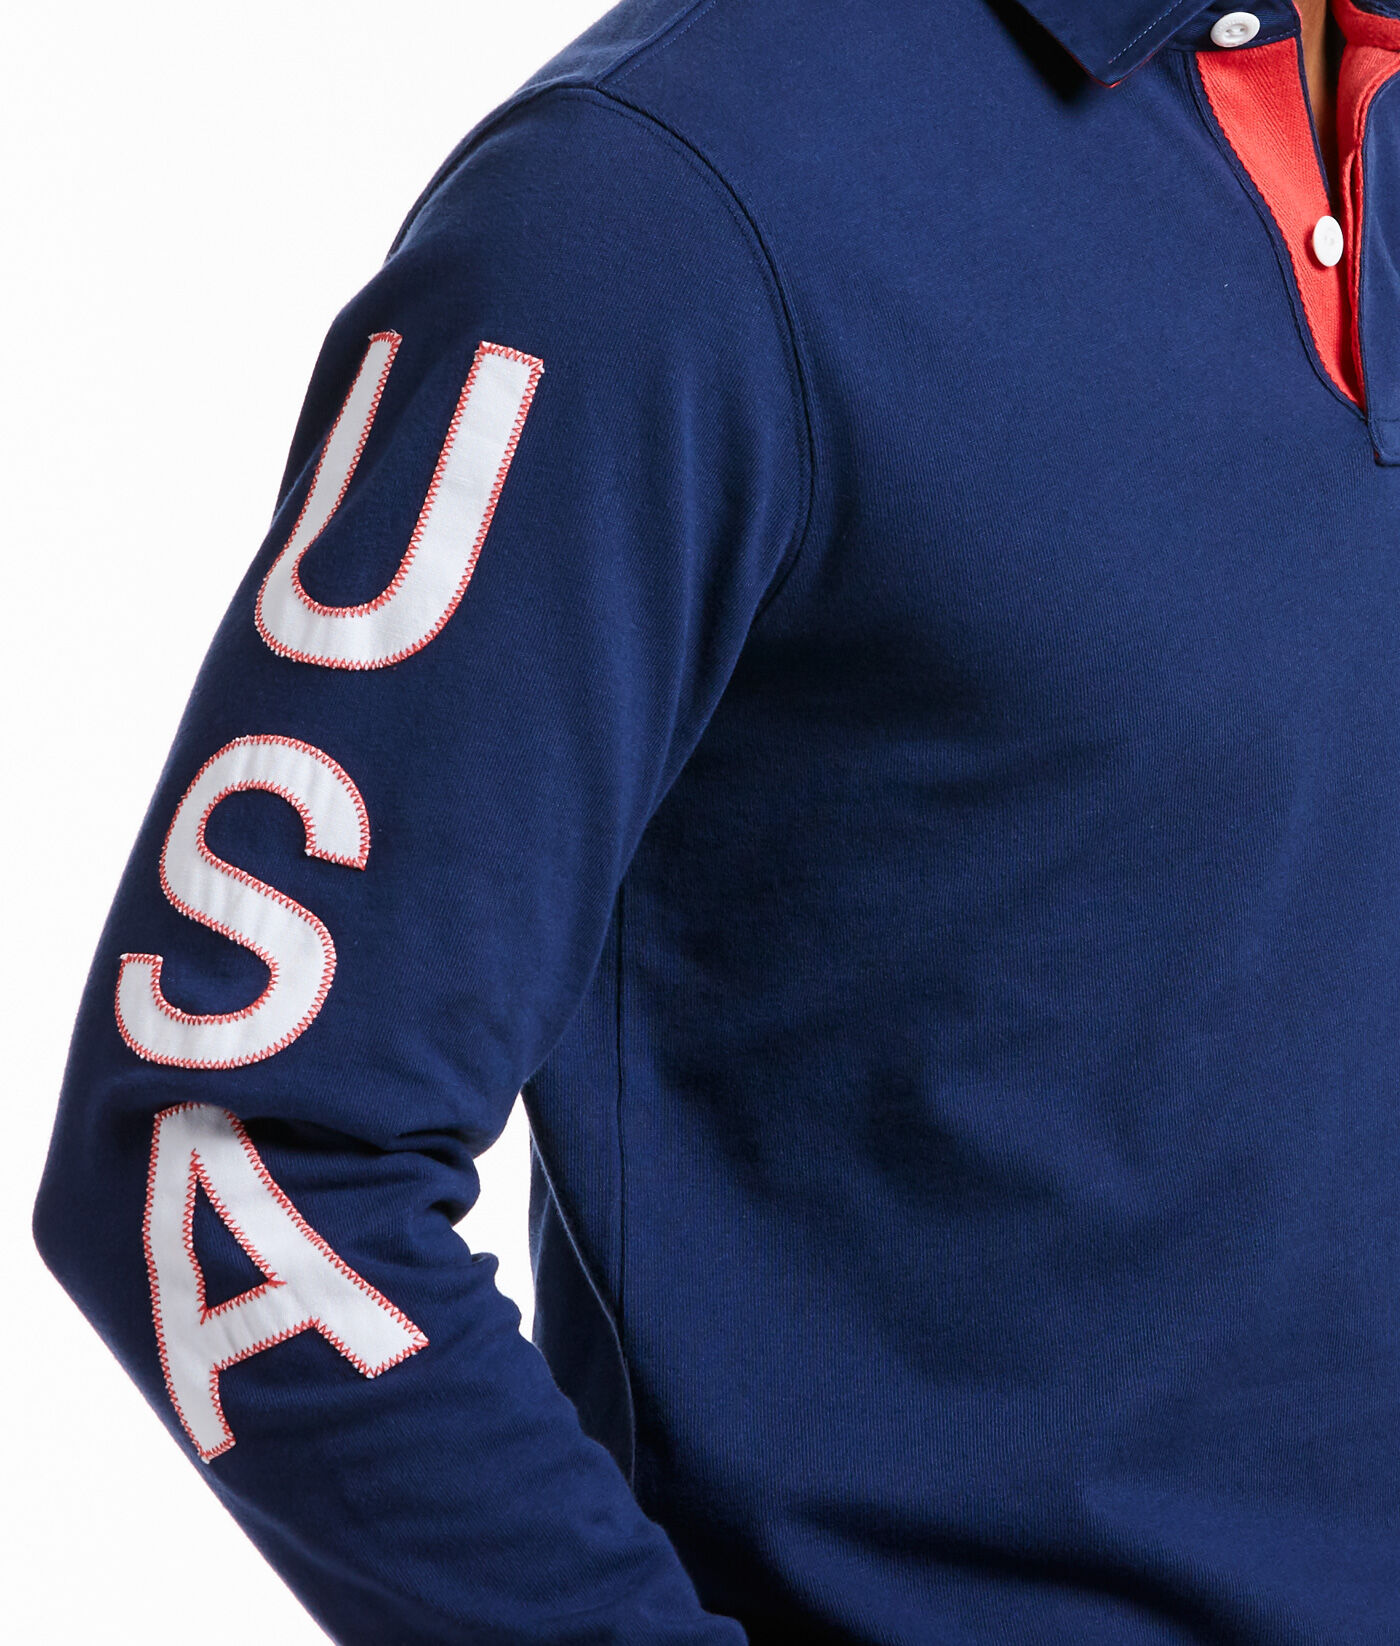 USA 2019 Rugby World Cup Home and Away Jerseys - FOOTBALL FASHION